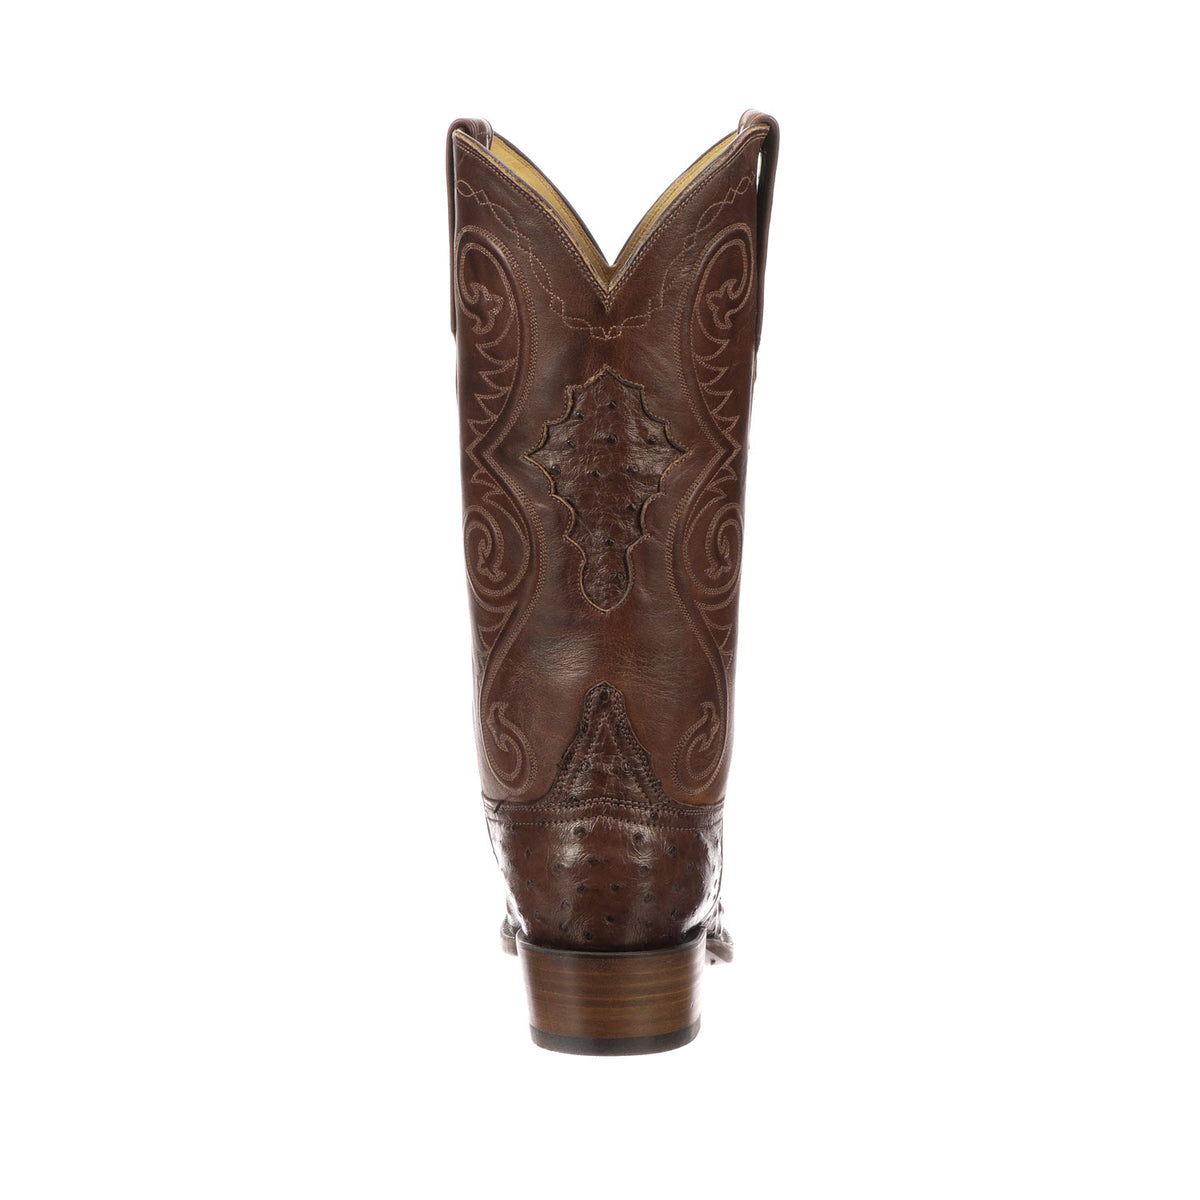 J's.o.l.e Cowboy Boots Woman Cowgirl Boots Botte Cowboy Femme Square Toe  Wide Mid Calf Brown US Size 6 : : Clothing, Shoes & Accessories